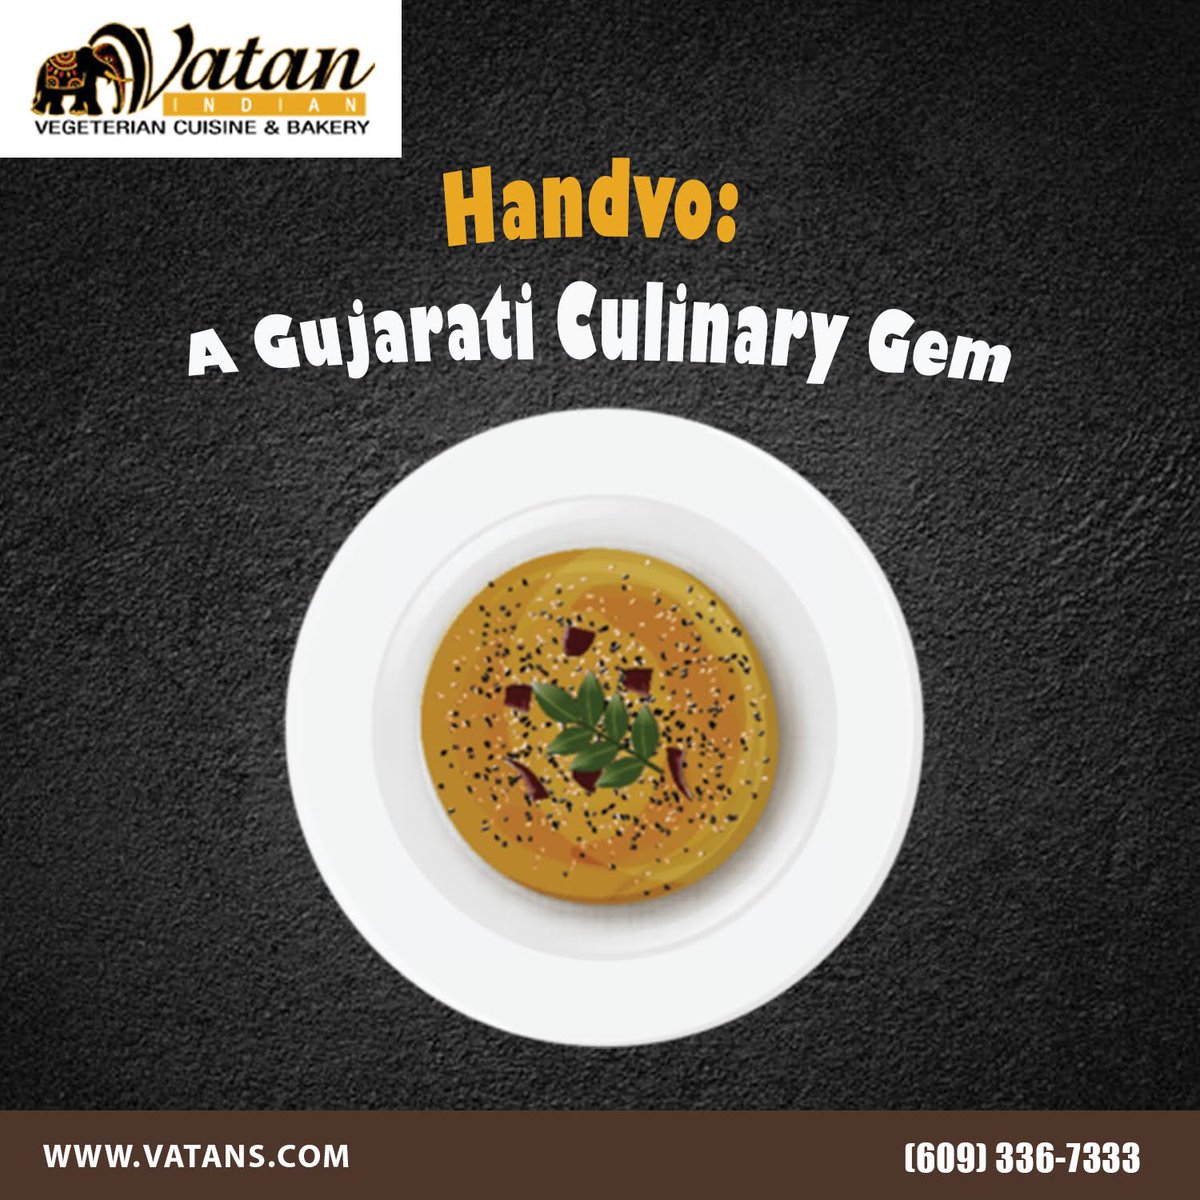 🍲  Introducing Handvo - a savory cake made from a blend of lentils, rice, and spices, baked to golden perfection. C

Know more at vatans.com/?utm_source=Tw…

#GujaratiGem #HandvoLove #CulinaryAdventure #njfood #njfoodie #njeats #foodie #newjersey #njfoodies #nj #njrestaurants